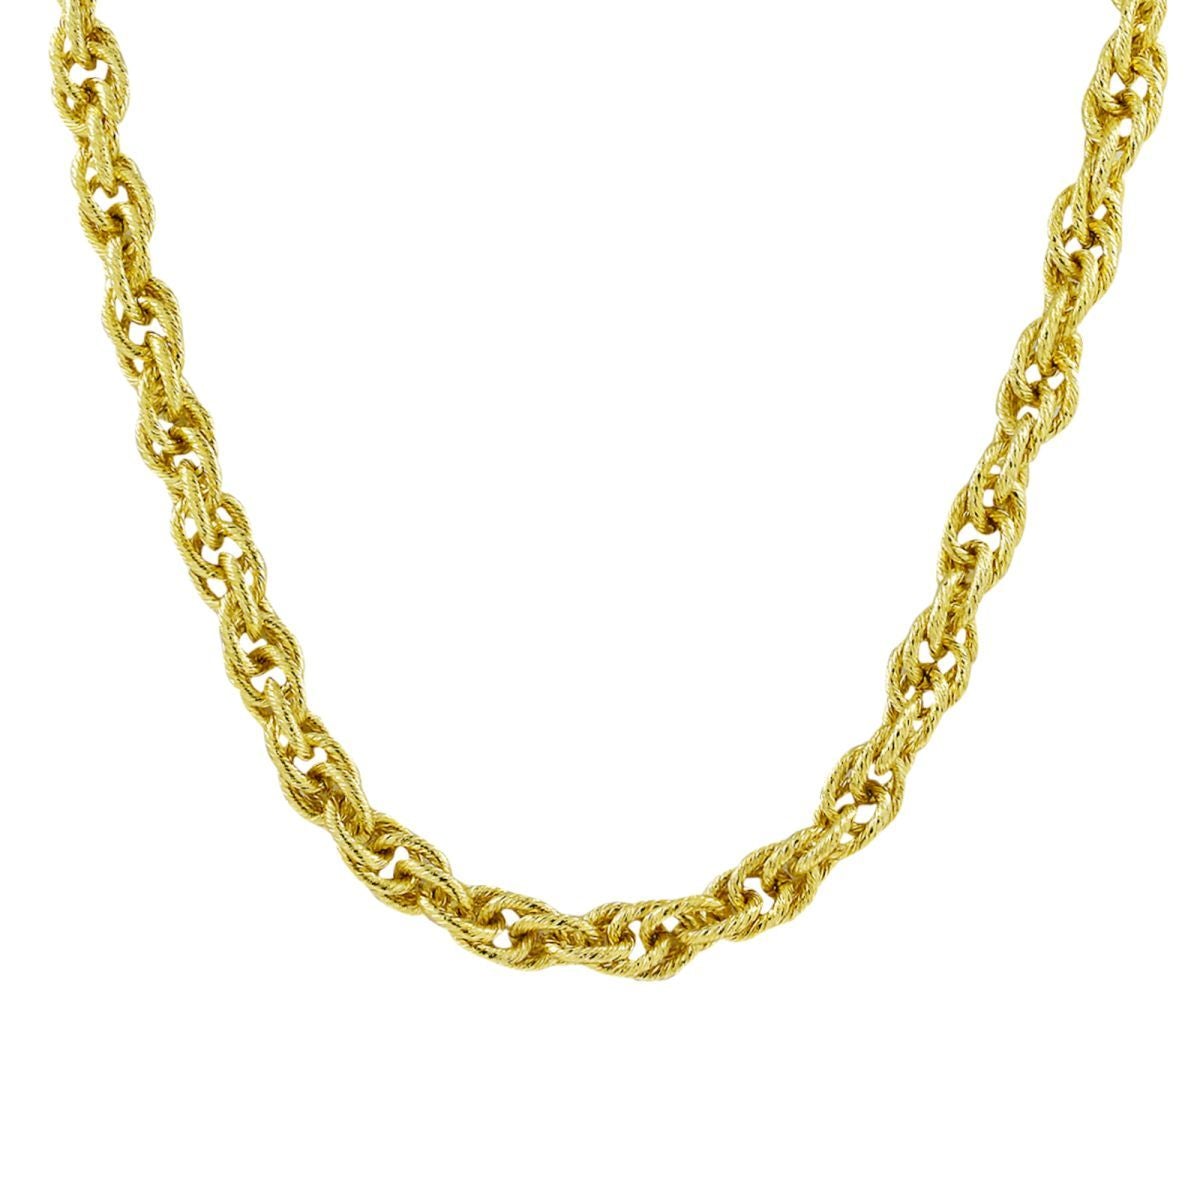 Oval Rope Links Matte 18K Gold Stainless Steel Brass Necklace Chain For Men